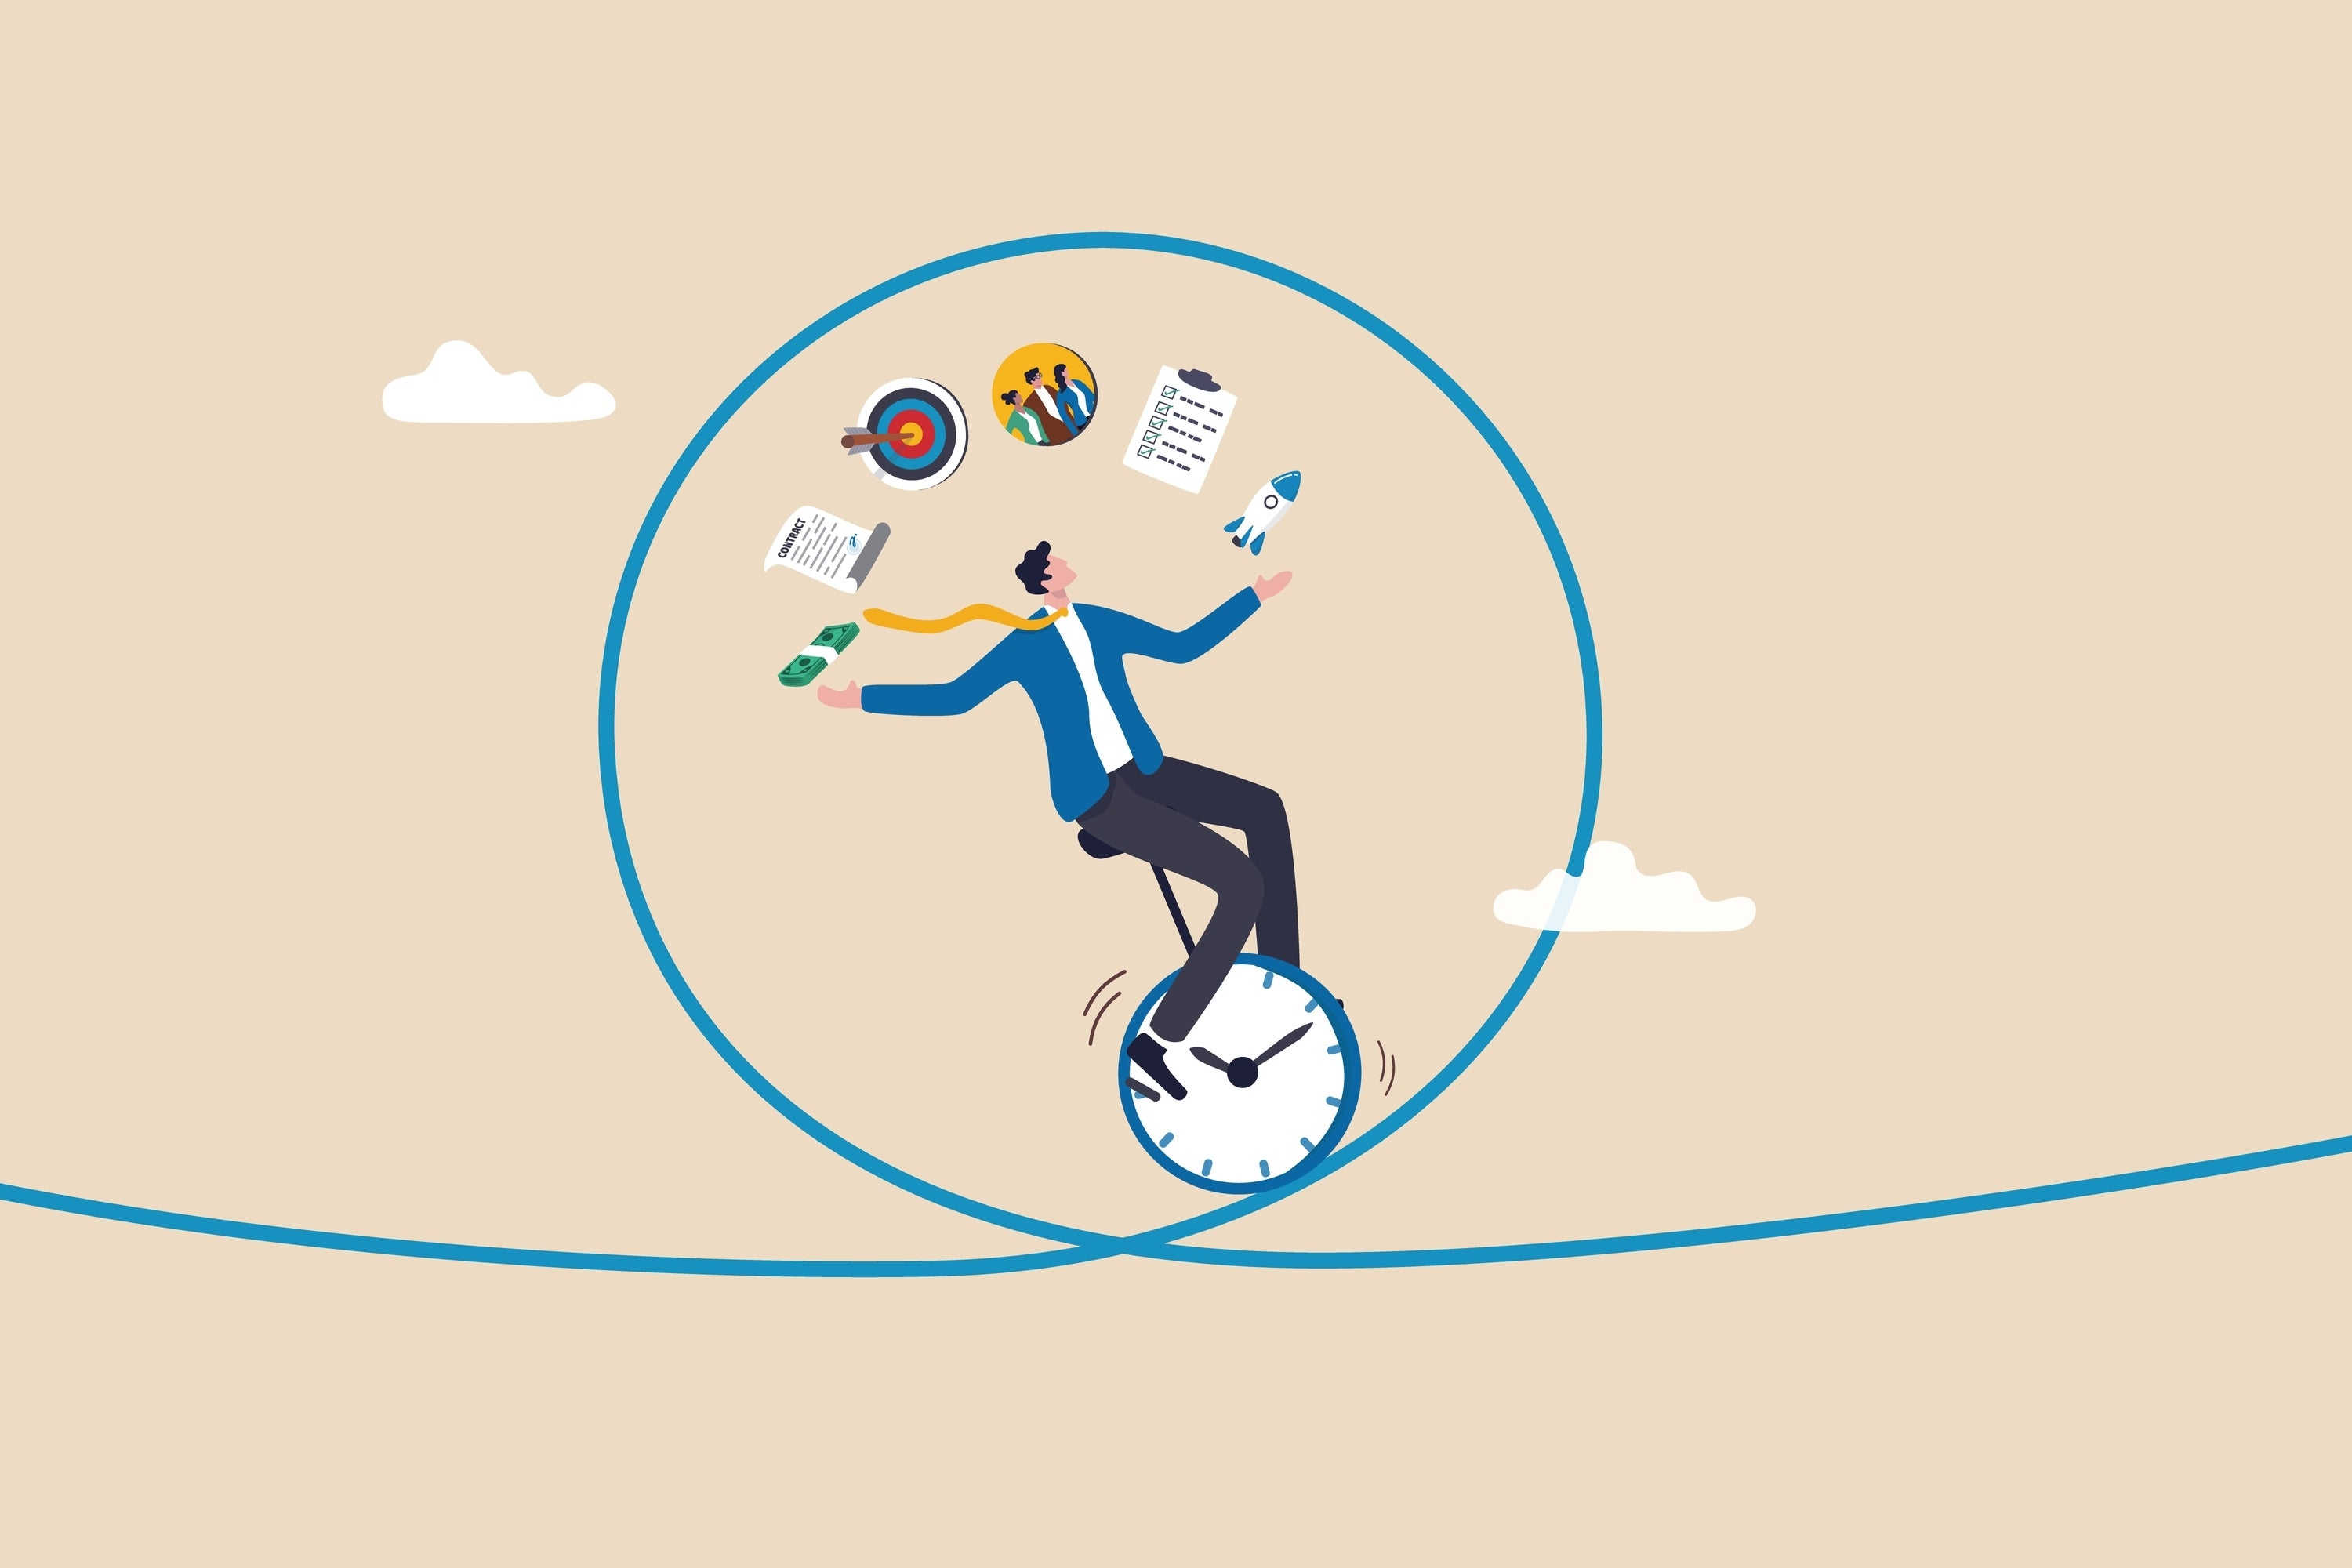 illustration of person on unicycle with wheel a clock, juggling stuff, including money, paperwork, notes, with circle as though going back and forth